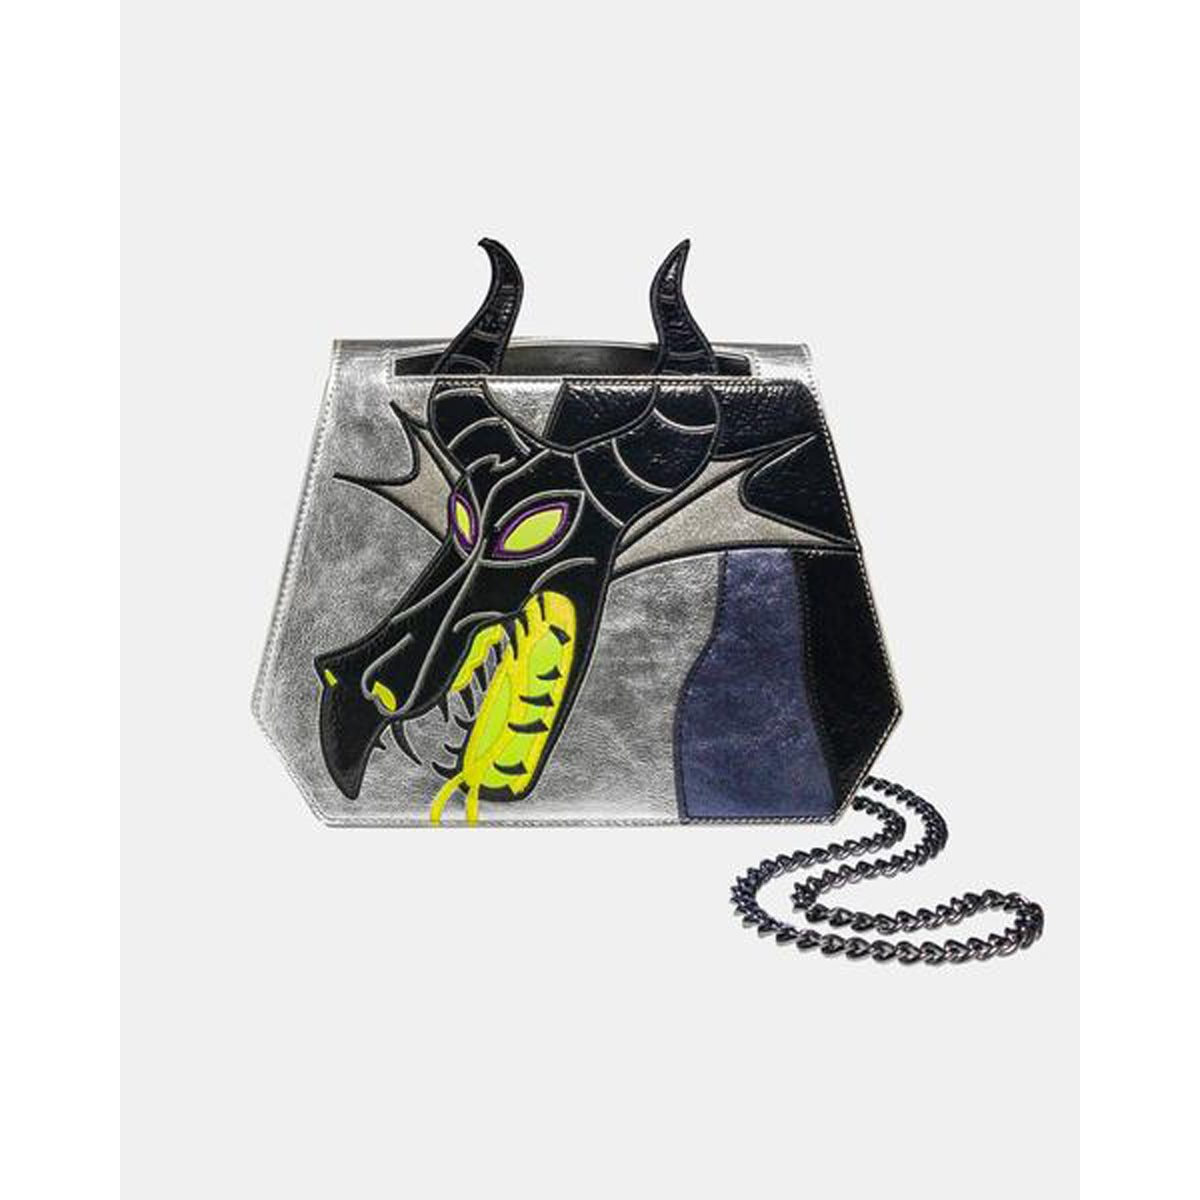 Brand New Maleficent Crossbody for Sale in Bakersfield, CA - OfferUp